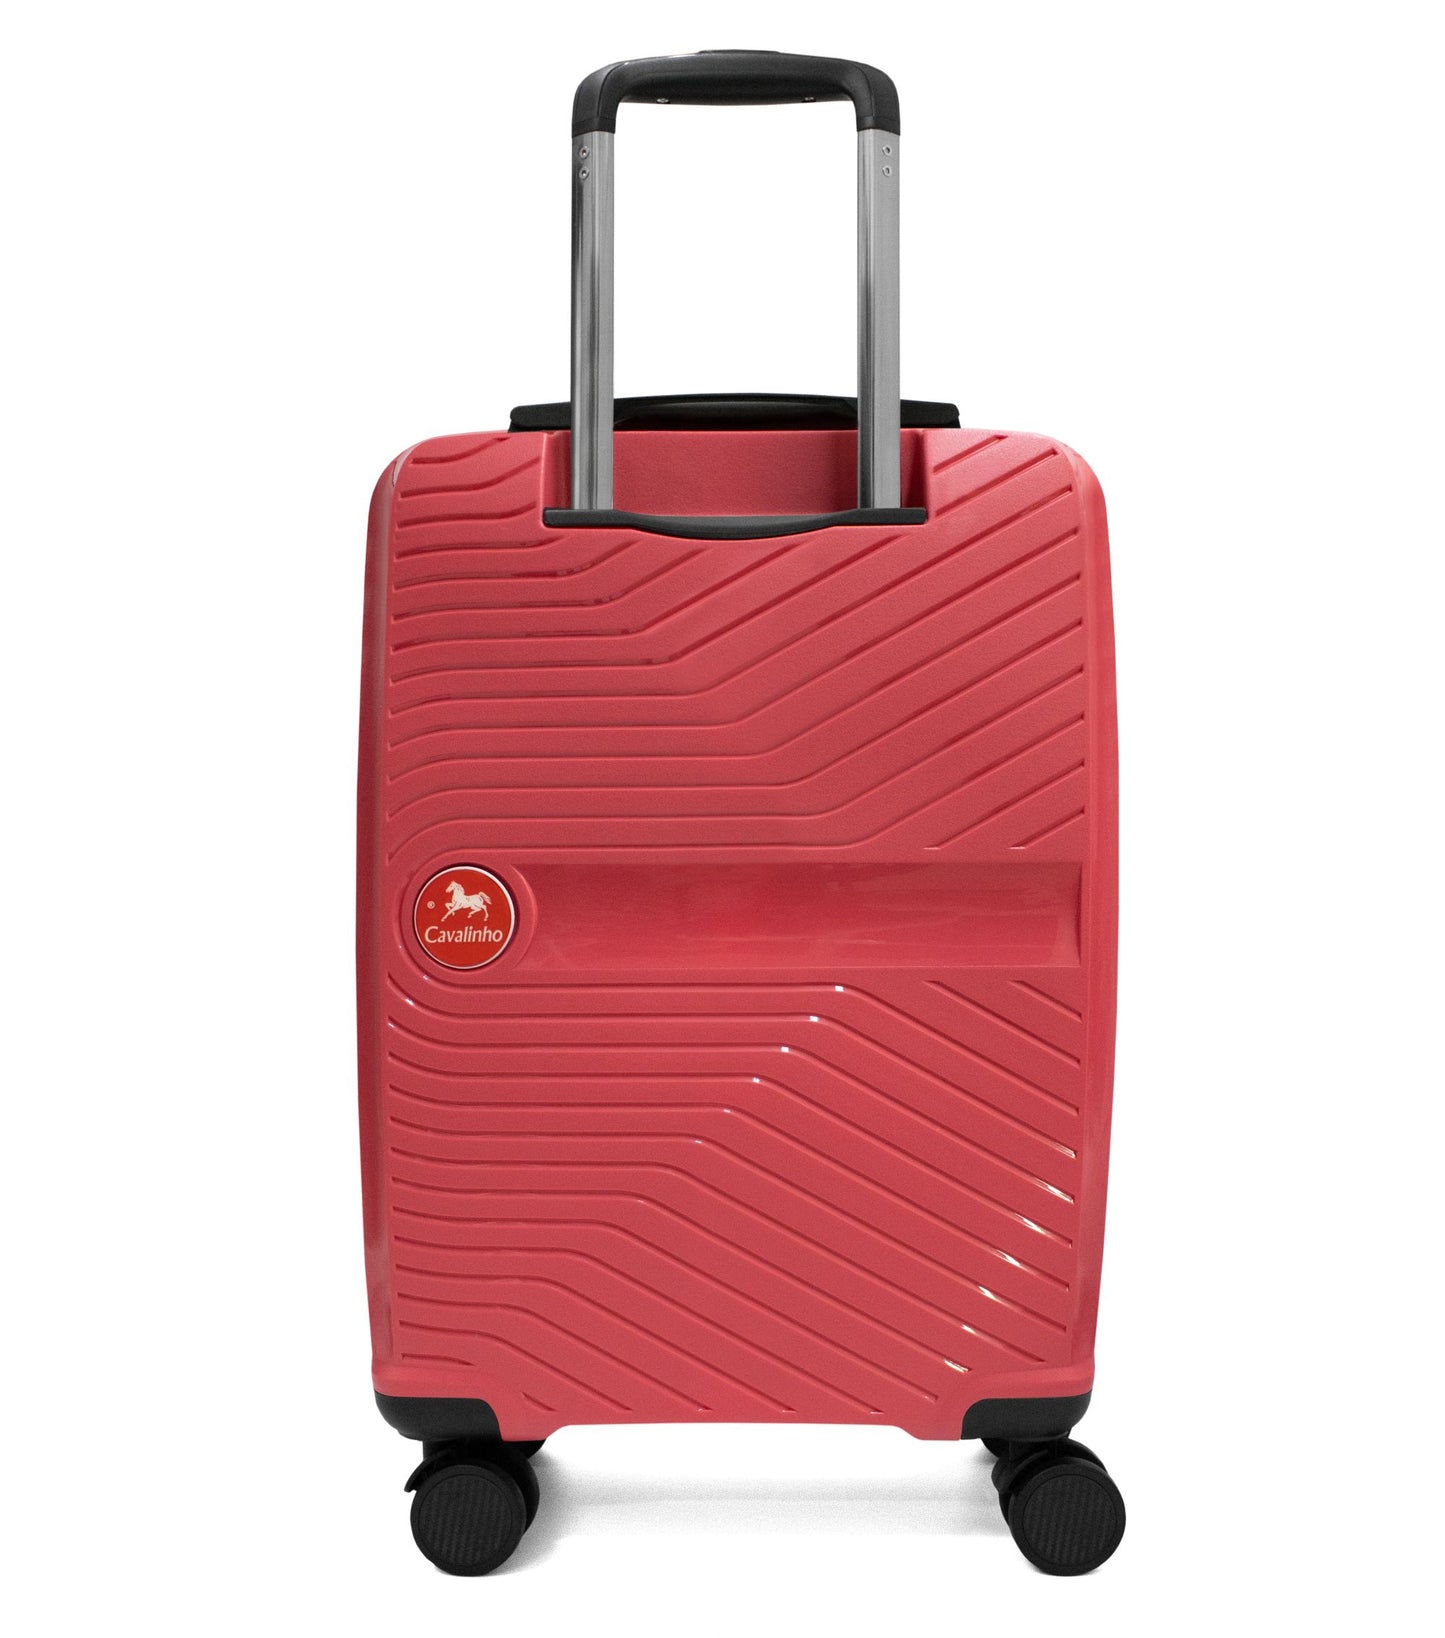 Cavalinho Colorful Carry-on Hardside Luggage (19") - 19 inch Coral - 68020004.27.19_3